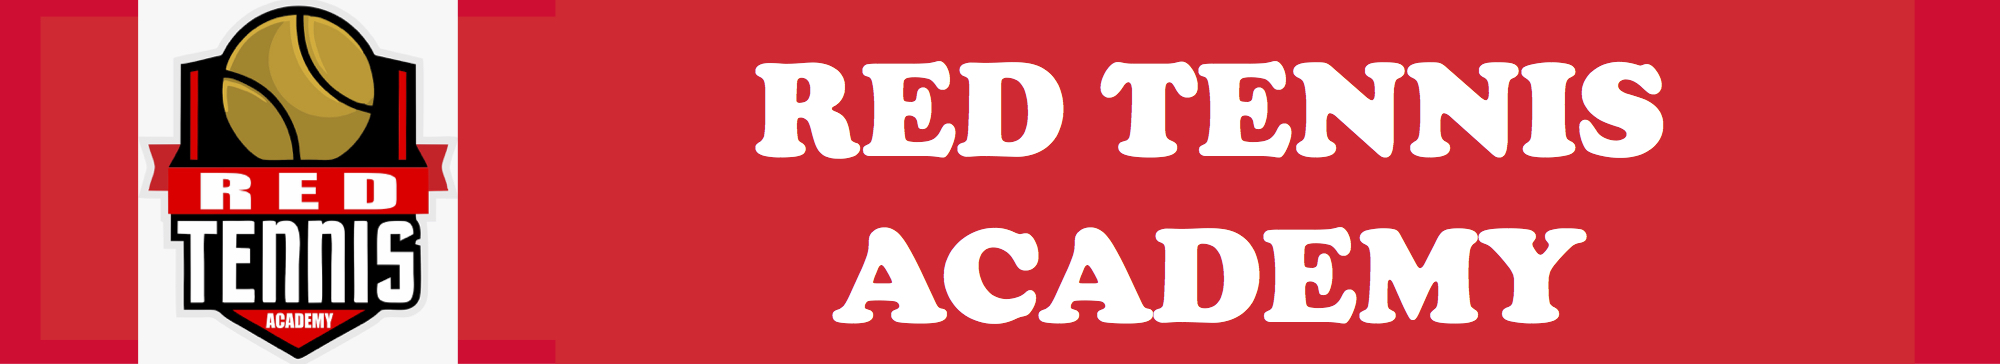 RED TENIS ACADEMY